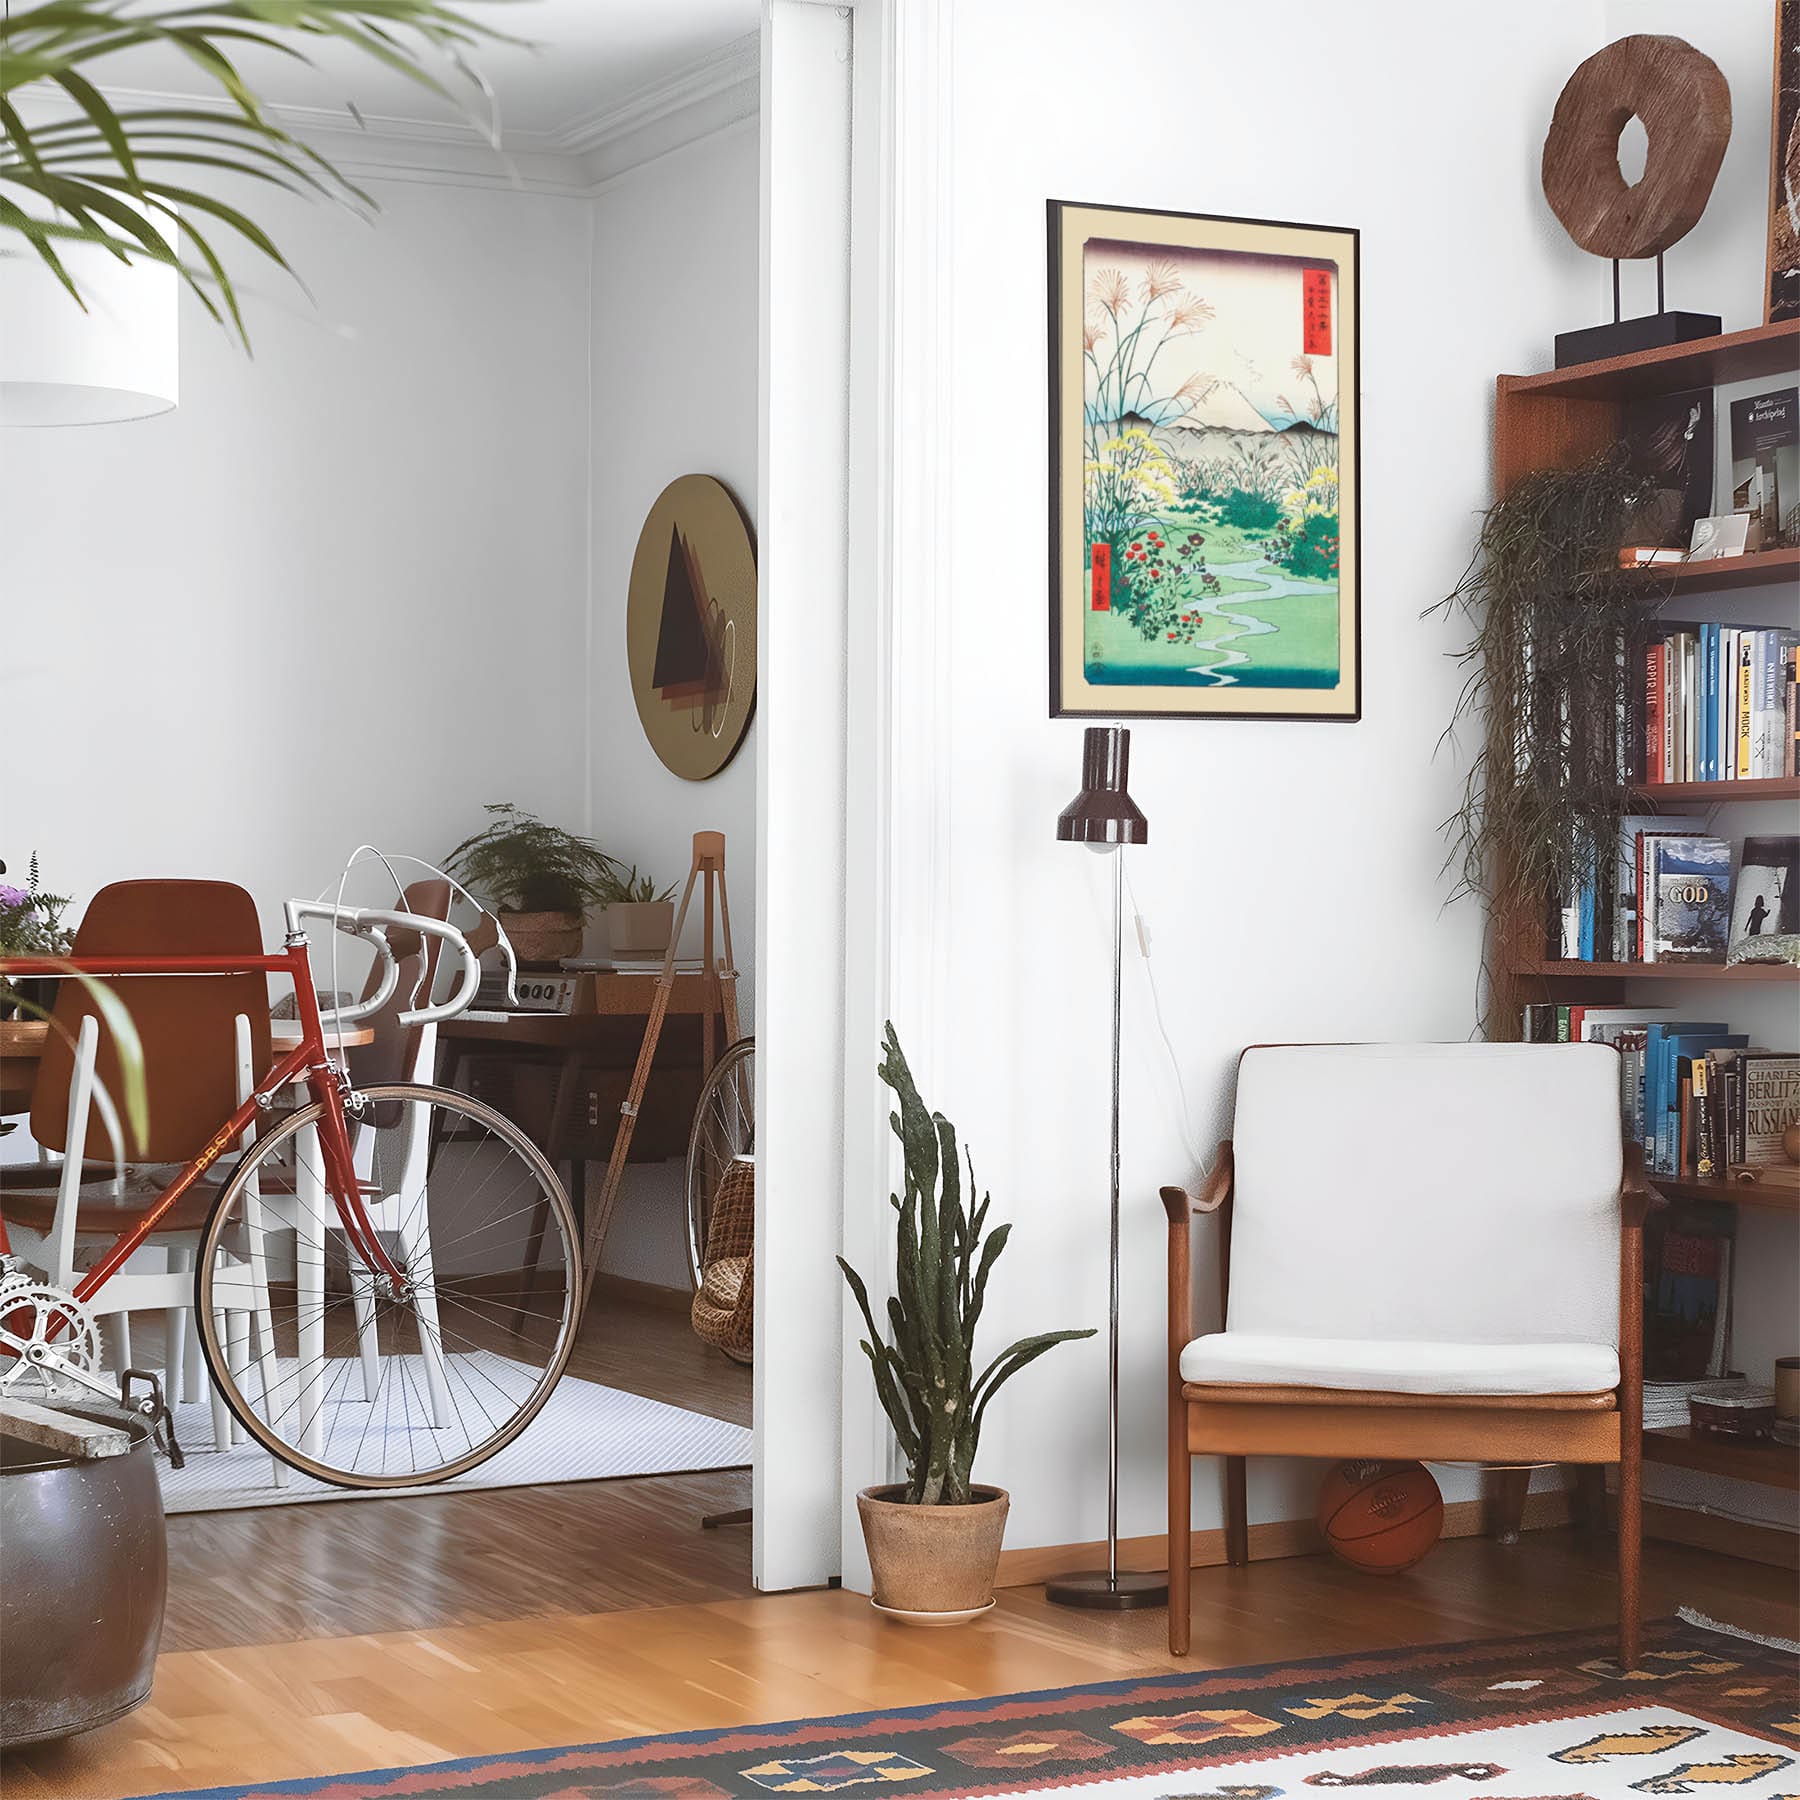 Eclectic living room with a road bike, bookshelf and house plants that features framed artwork of a River and Mountain Woodblock above a chair and lamp